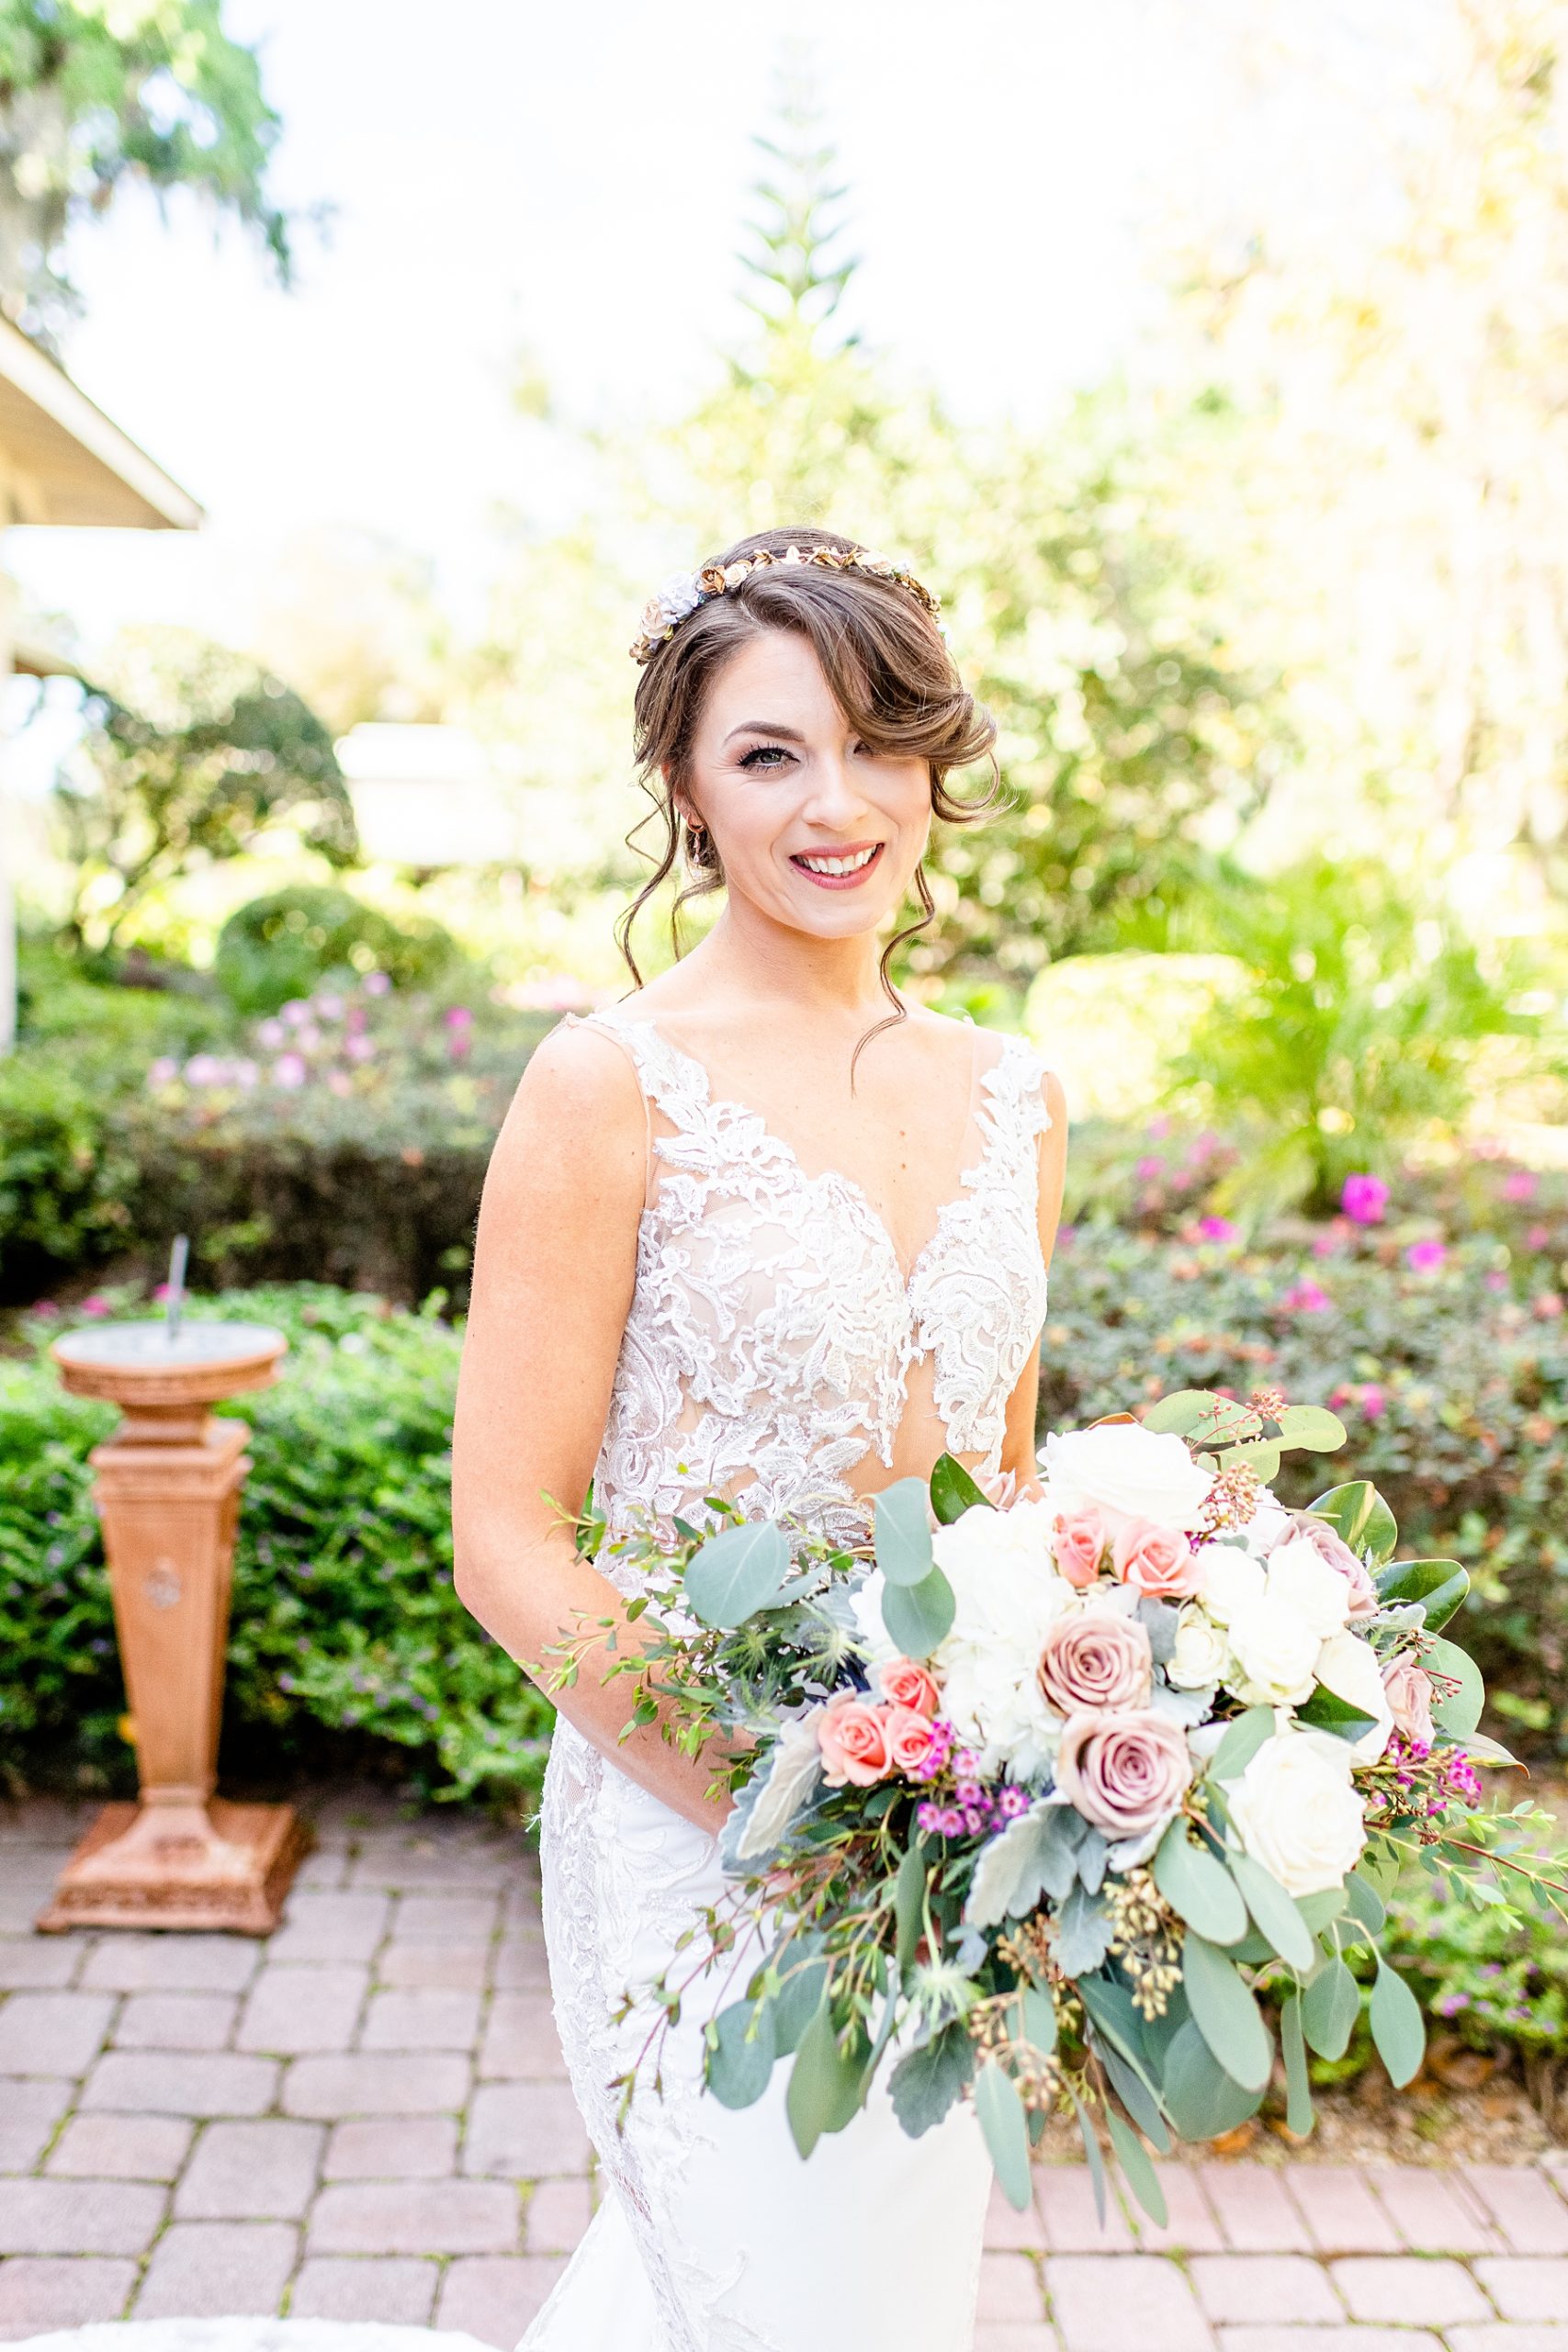 Bride with Bouquet | Town Manor | Chynna Pacheco Photography